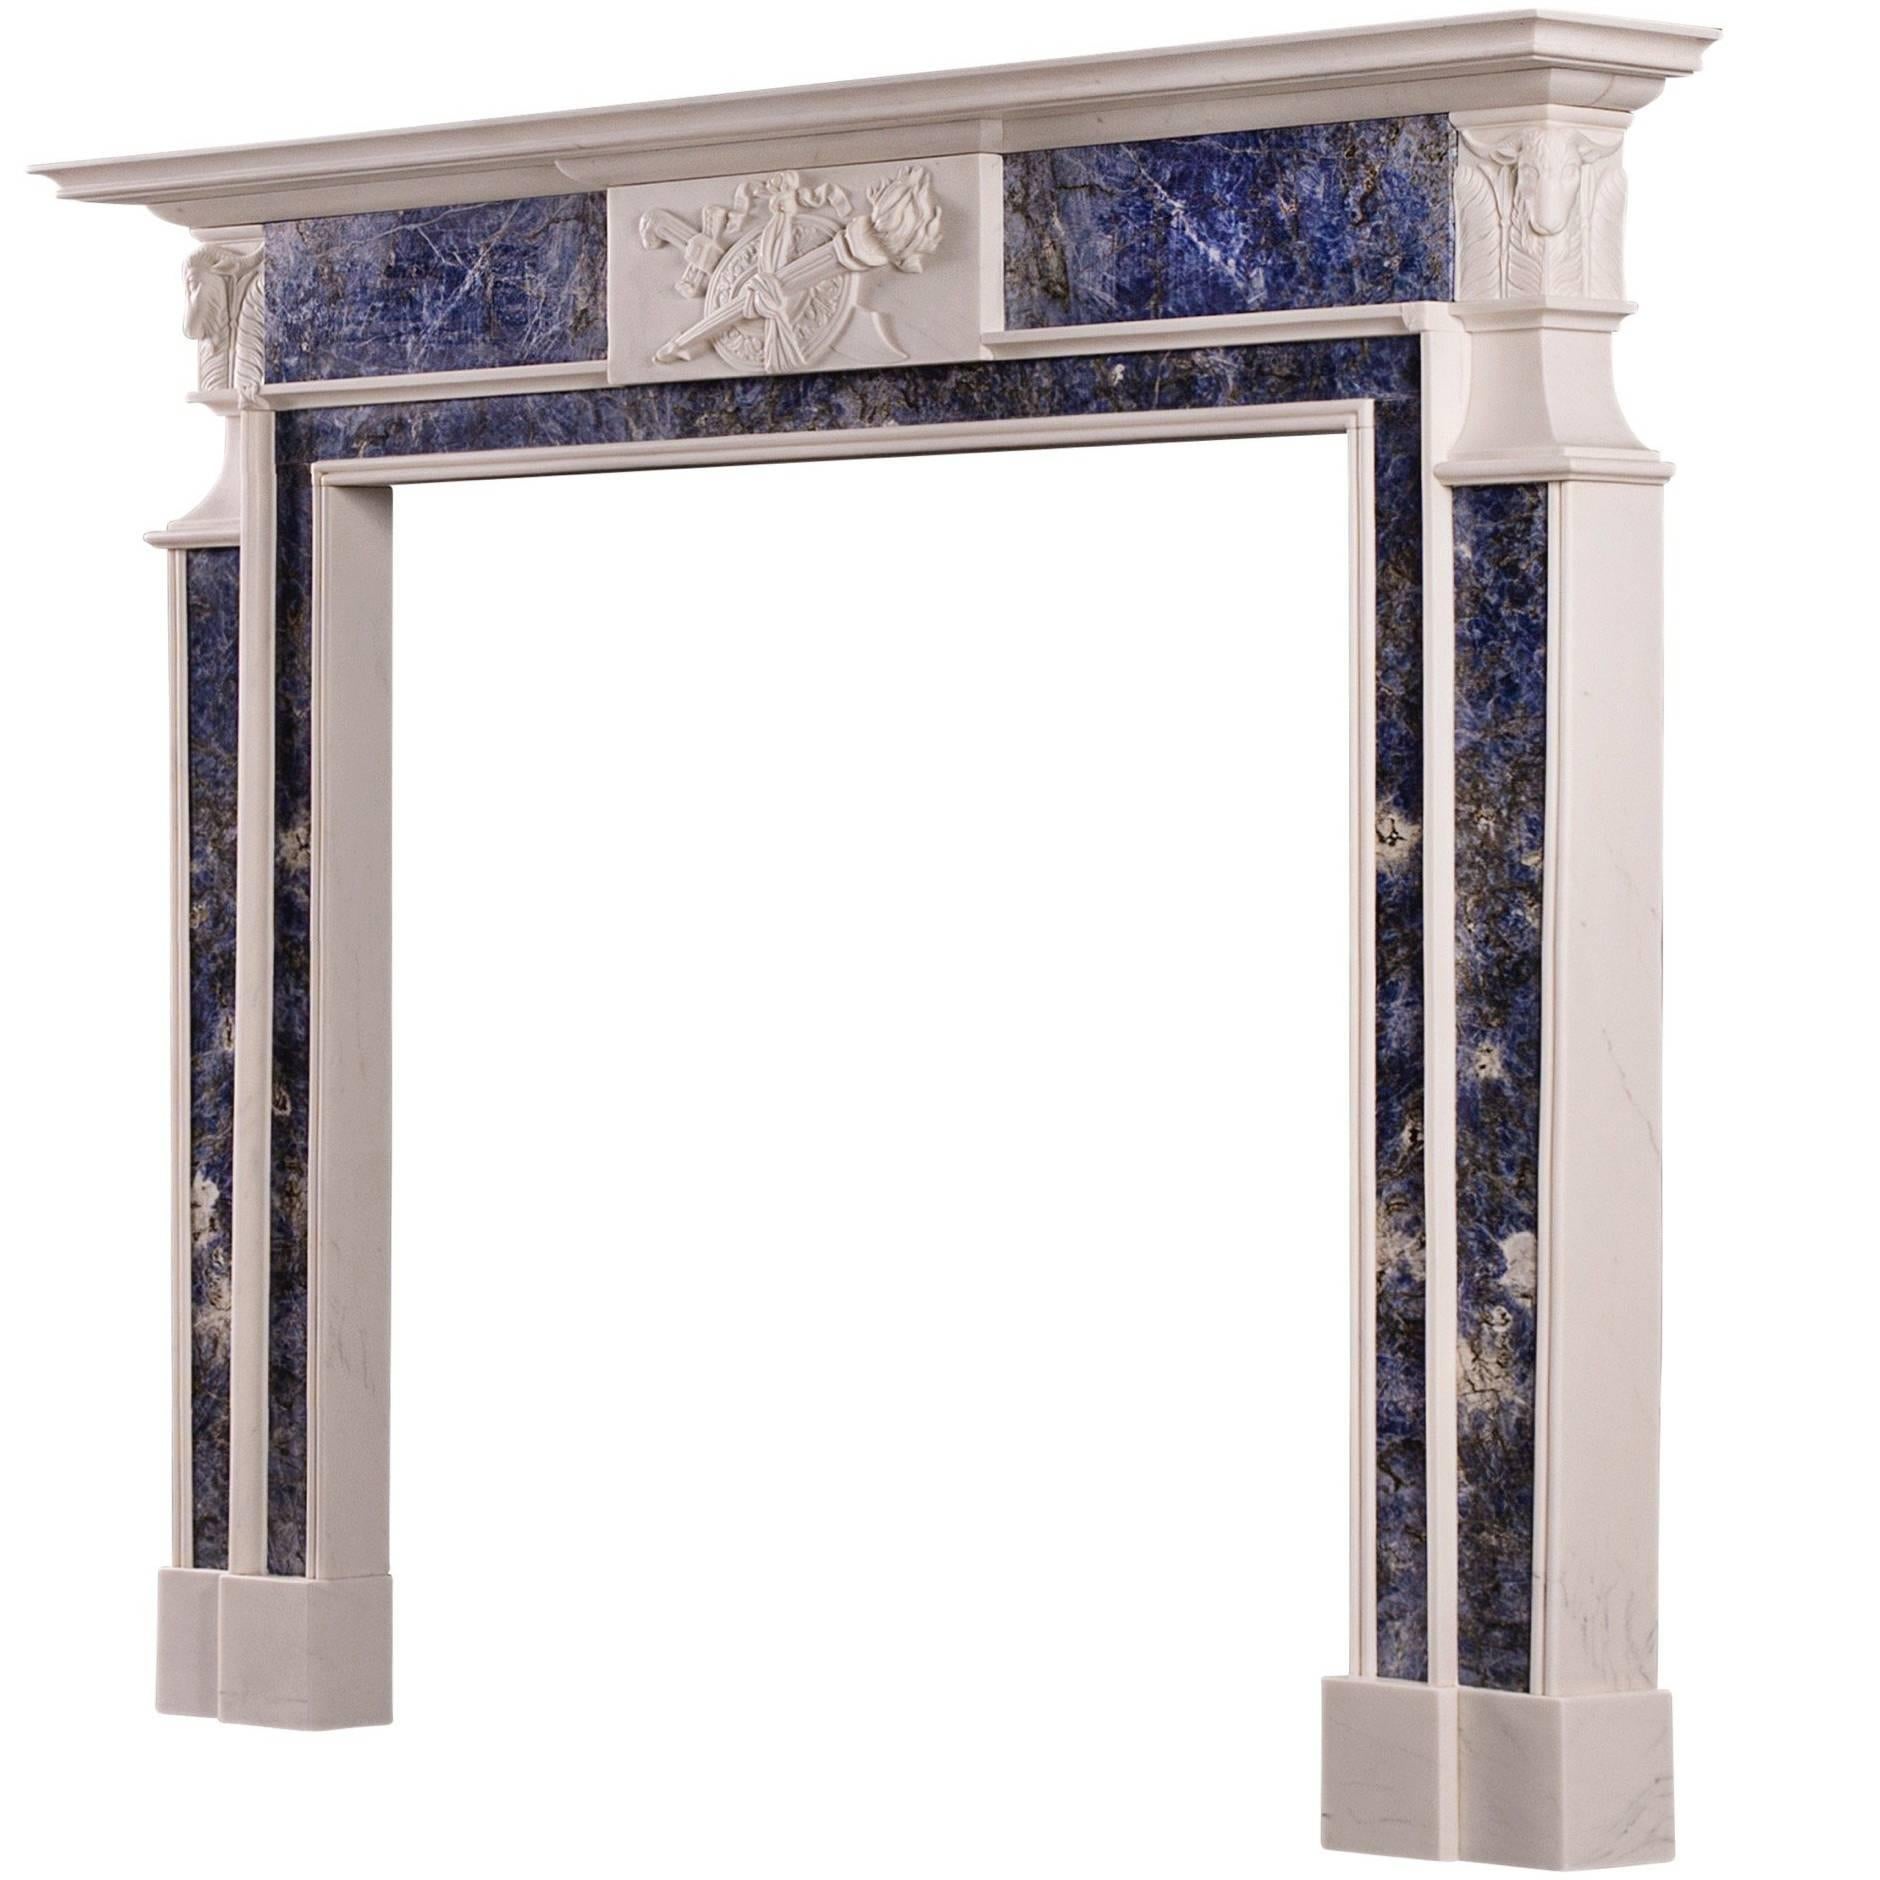 Late Georgian White Marble Fireplace with Blue Inlay